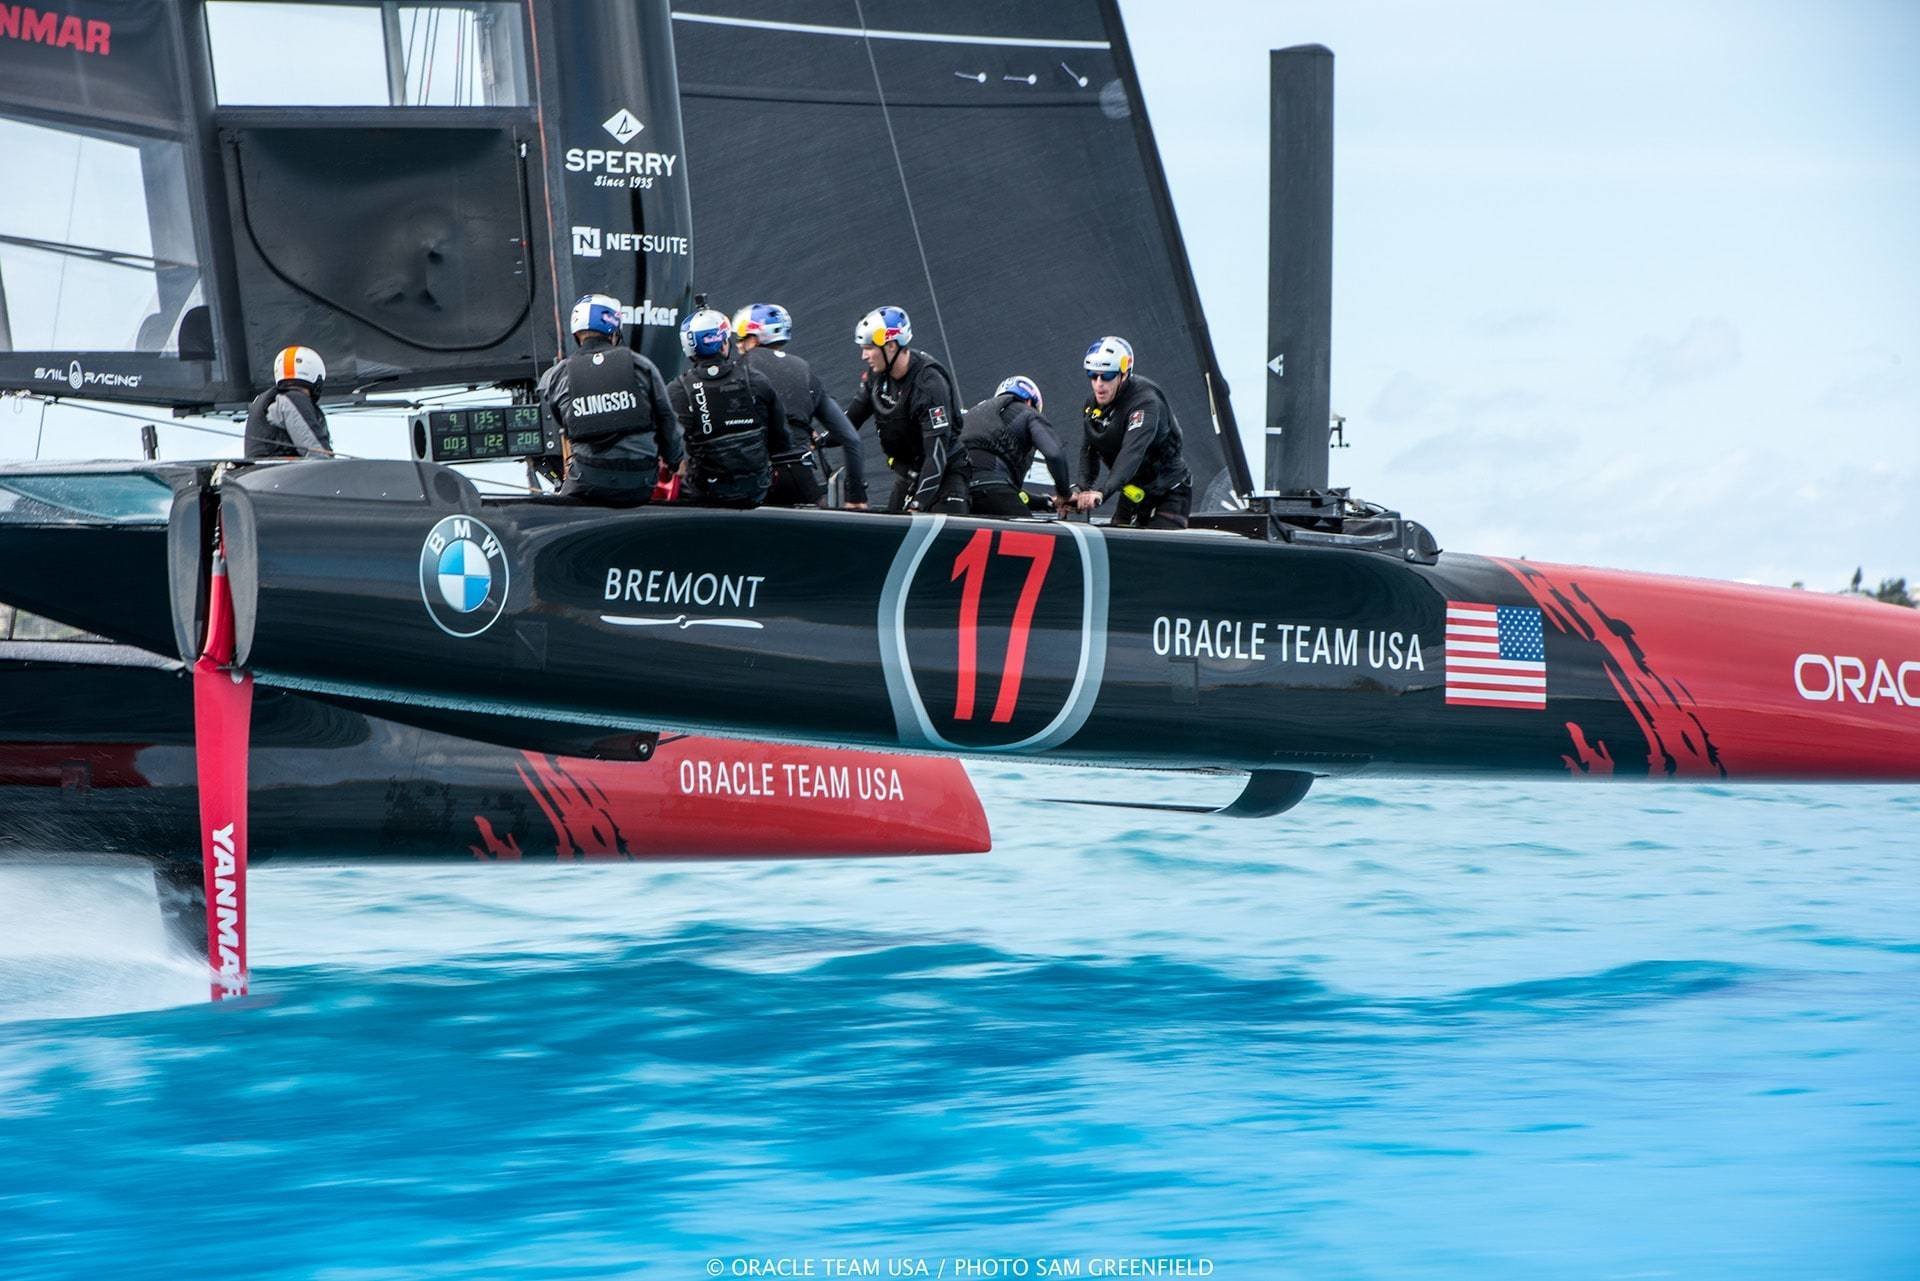 America’s Cup 2017 Sails into Bermuda This May